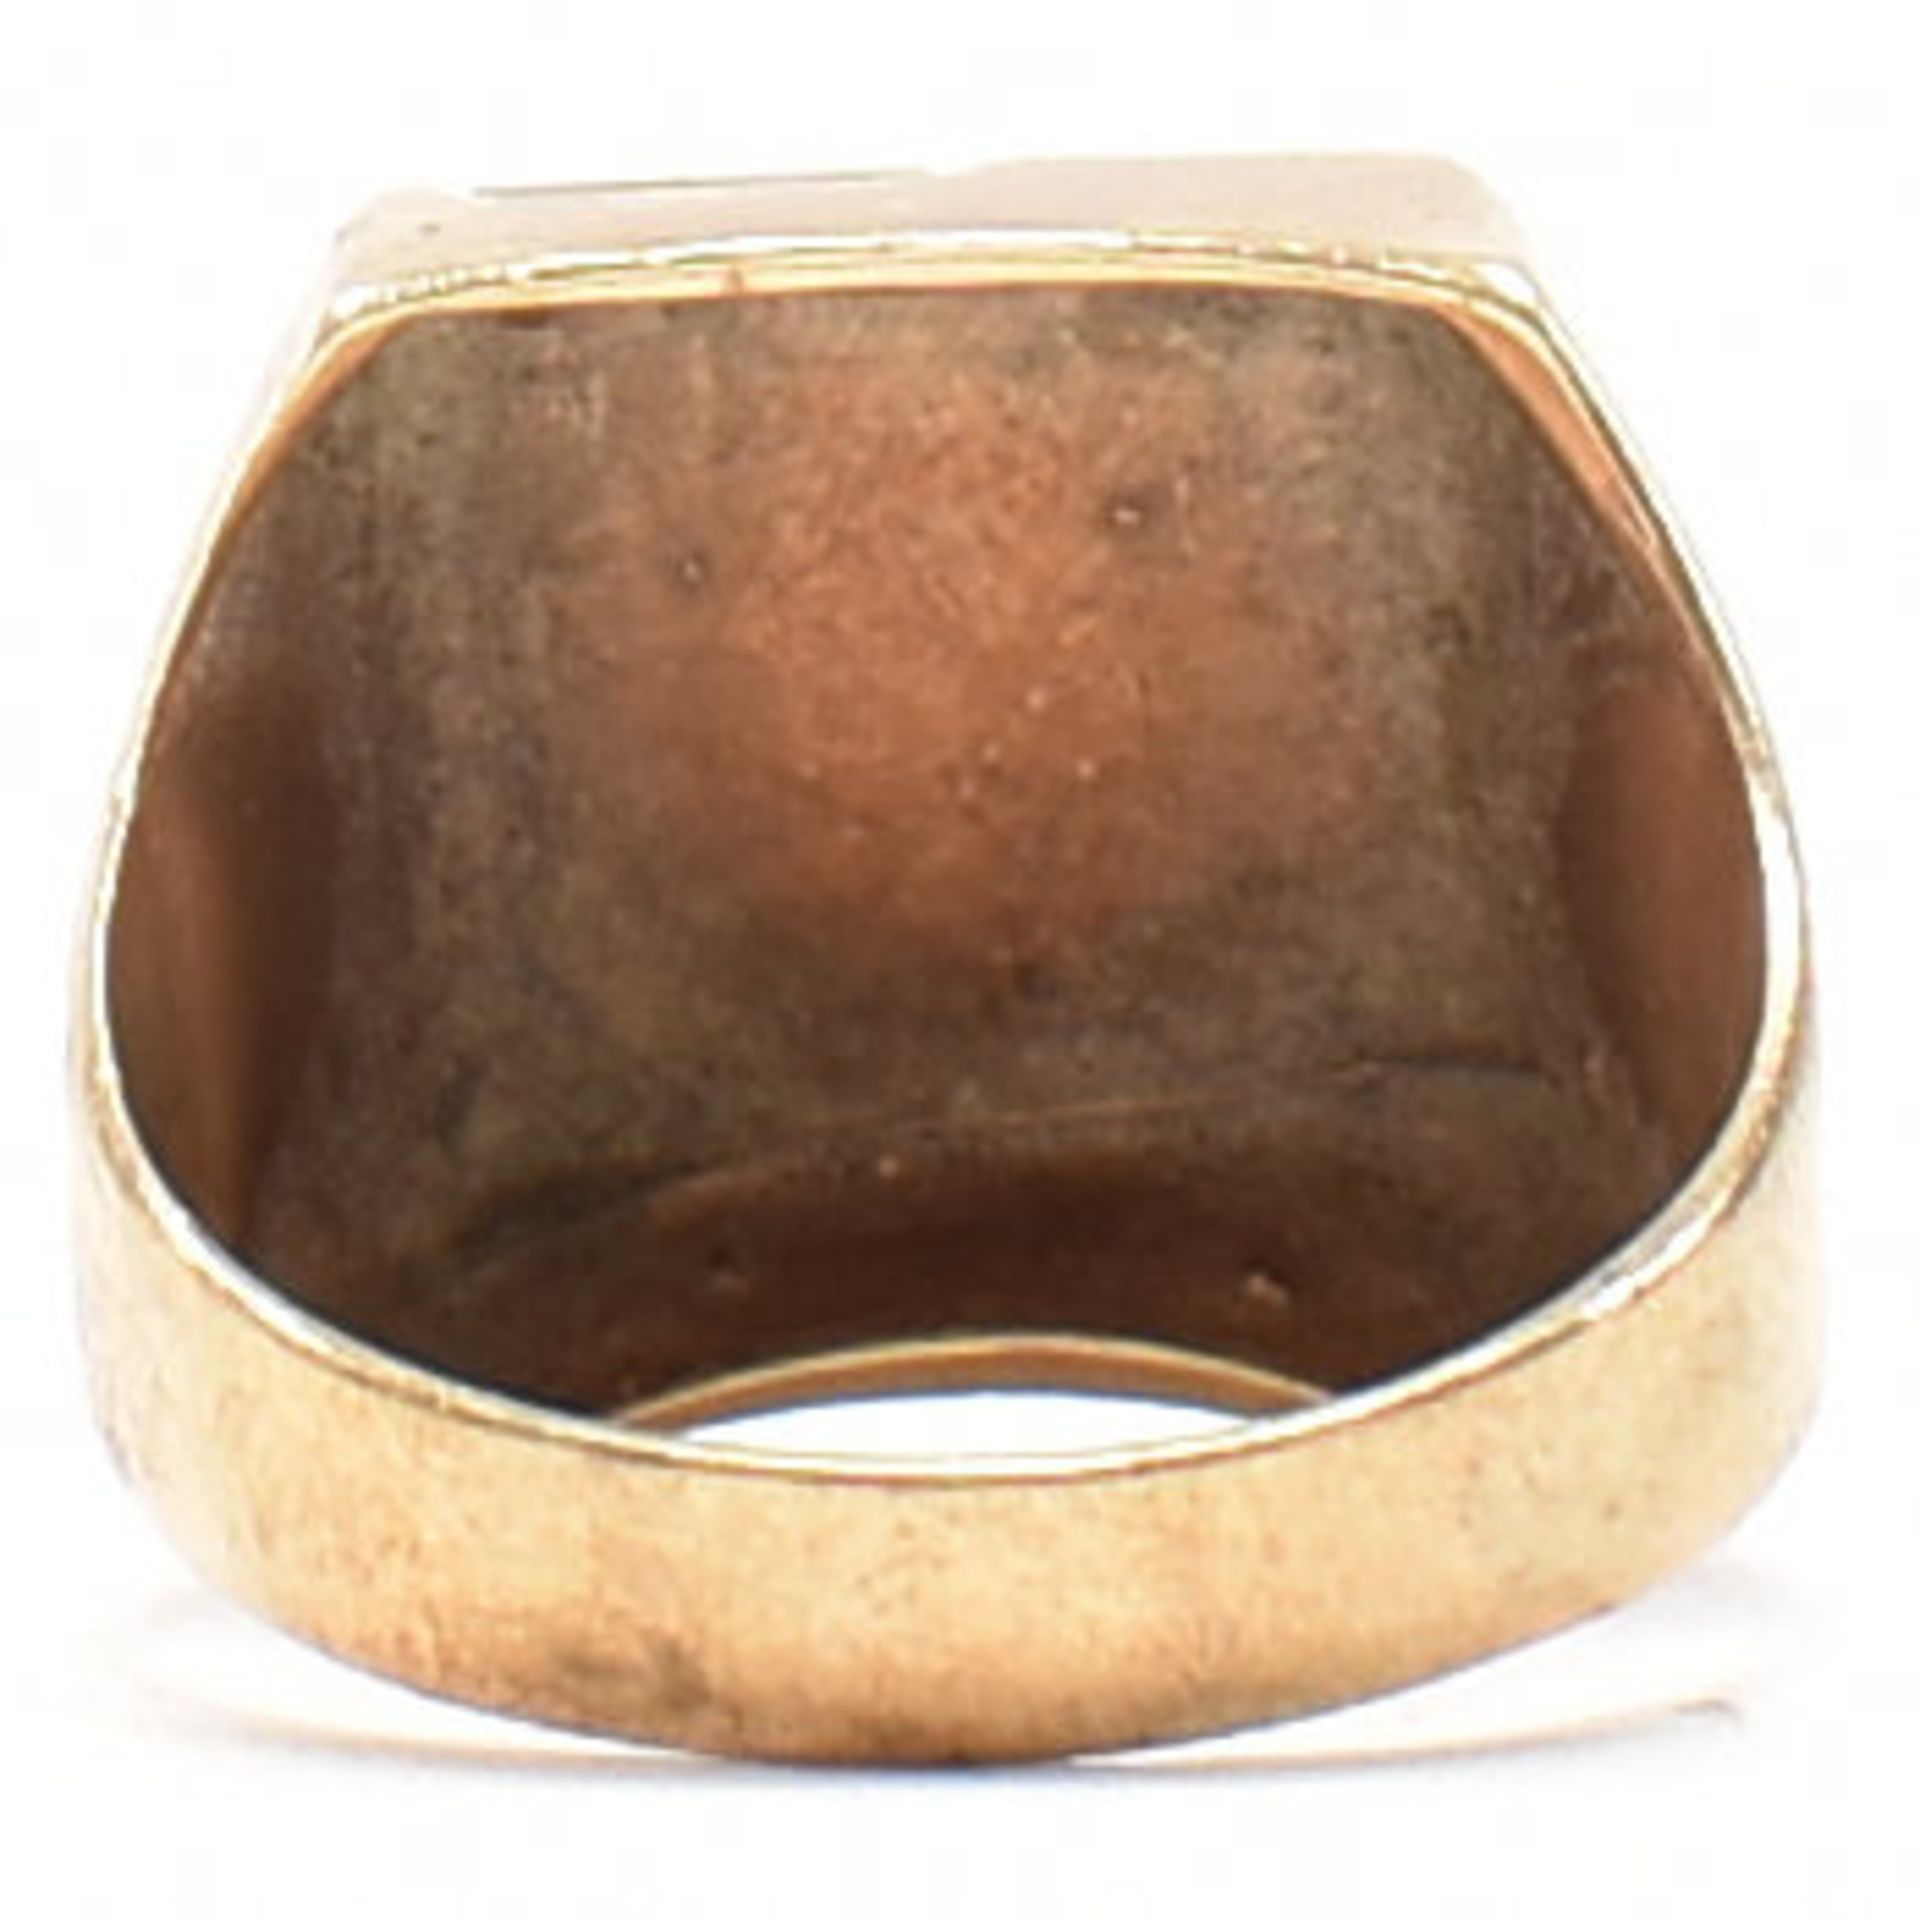 HALLMARKED 9CT GOLD & ONYX RING - Image 6 of 10